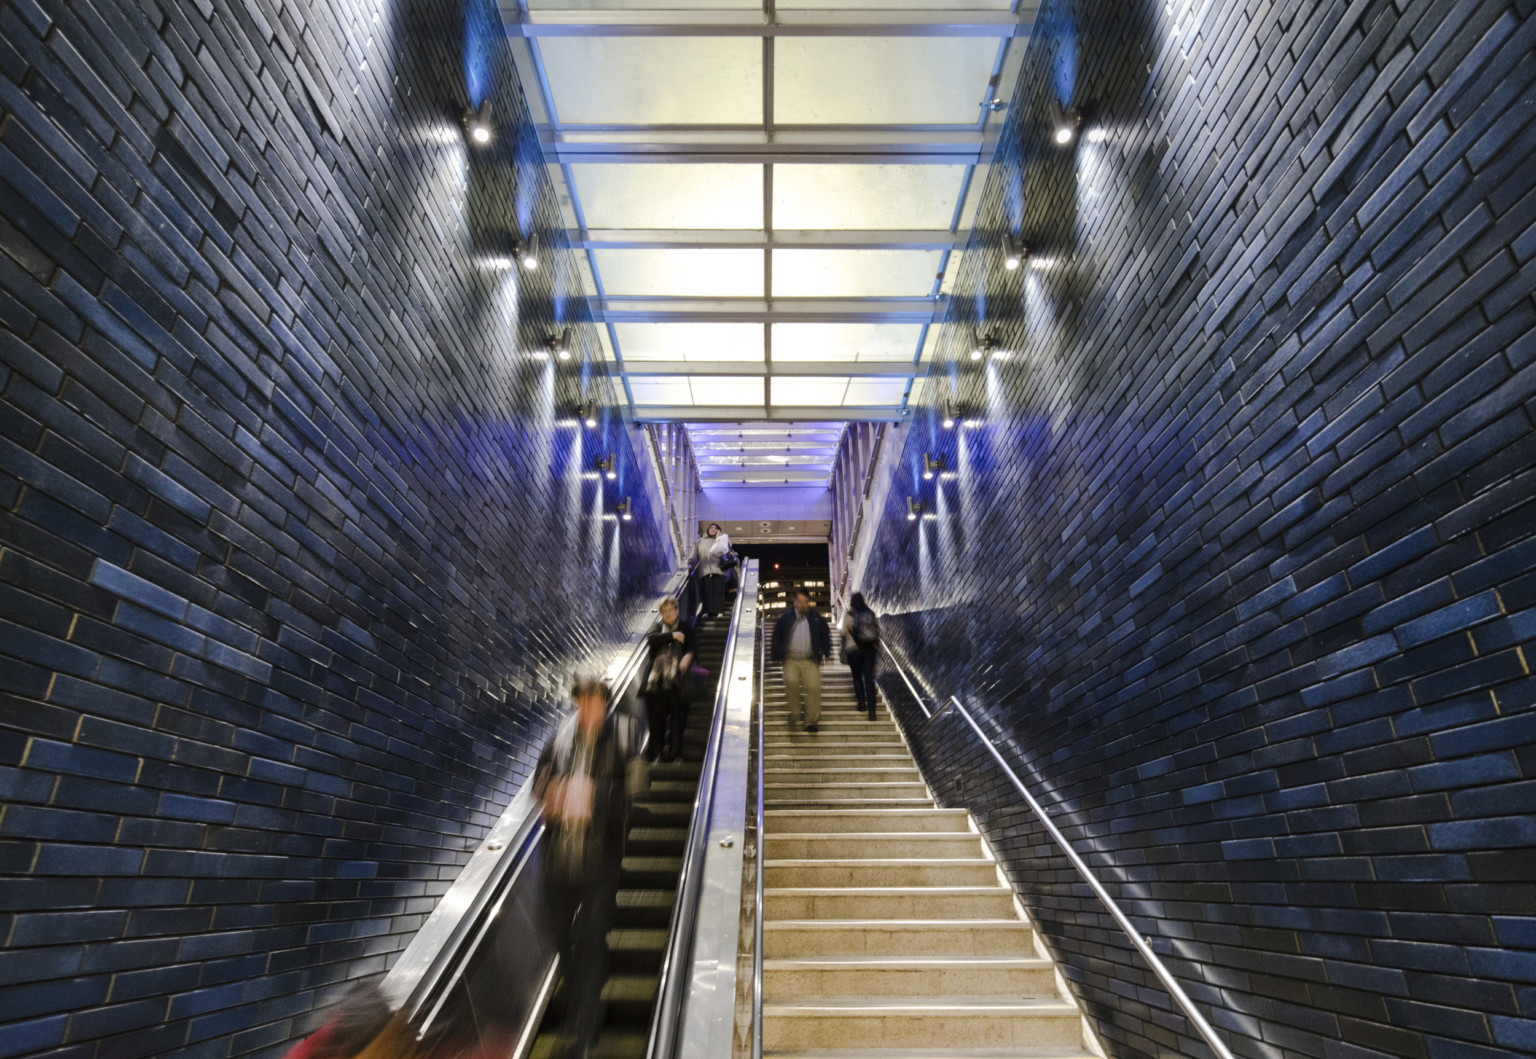 An illuminated glass panel canopy ceiling over subterranean escalator (left) and stairs (right) with tiled walls